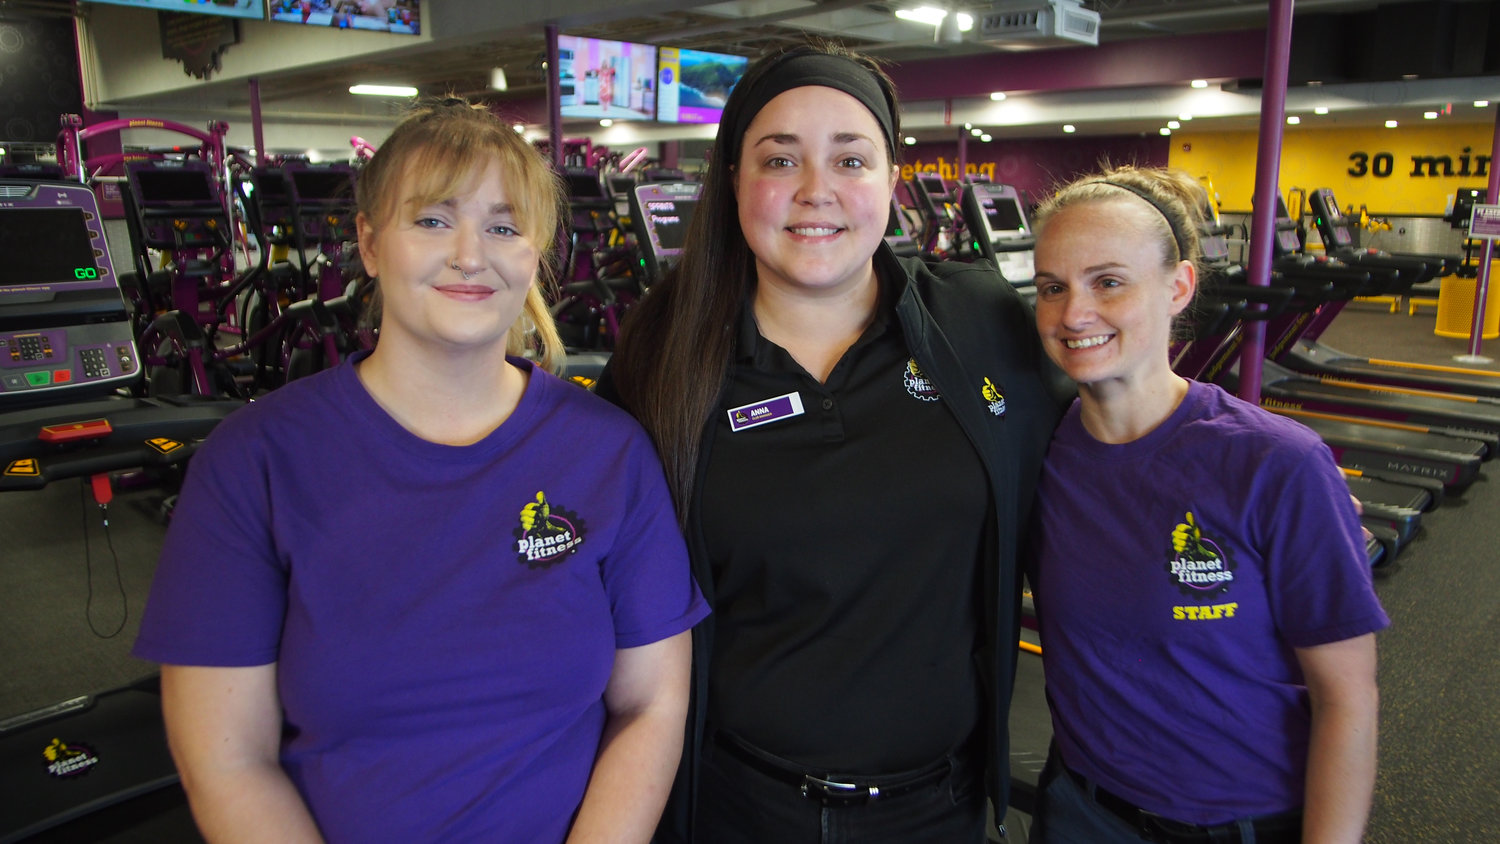 Planet Fitness opens to constant traffic